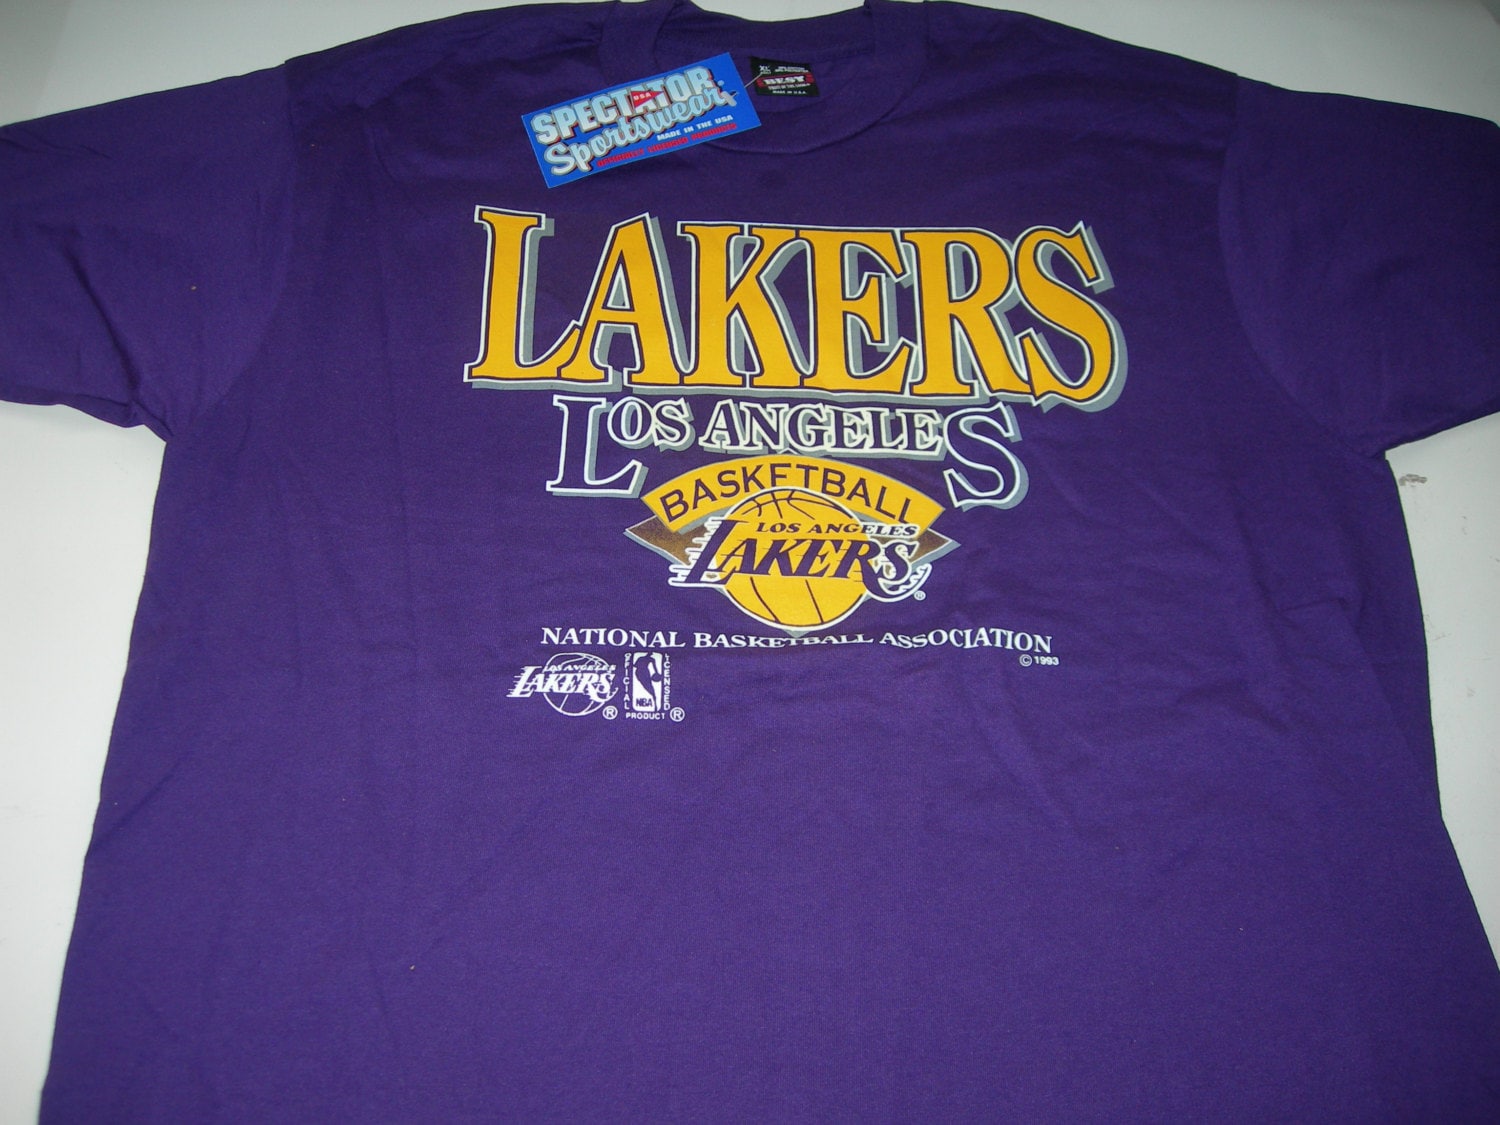 Los Angeles Lakers basketball nba vintage t shirt by | Etsy